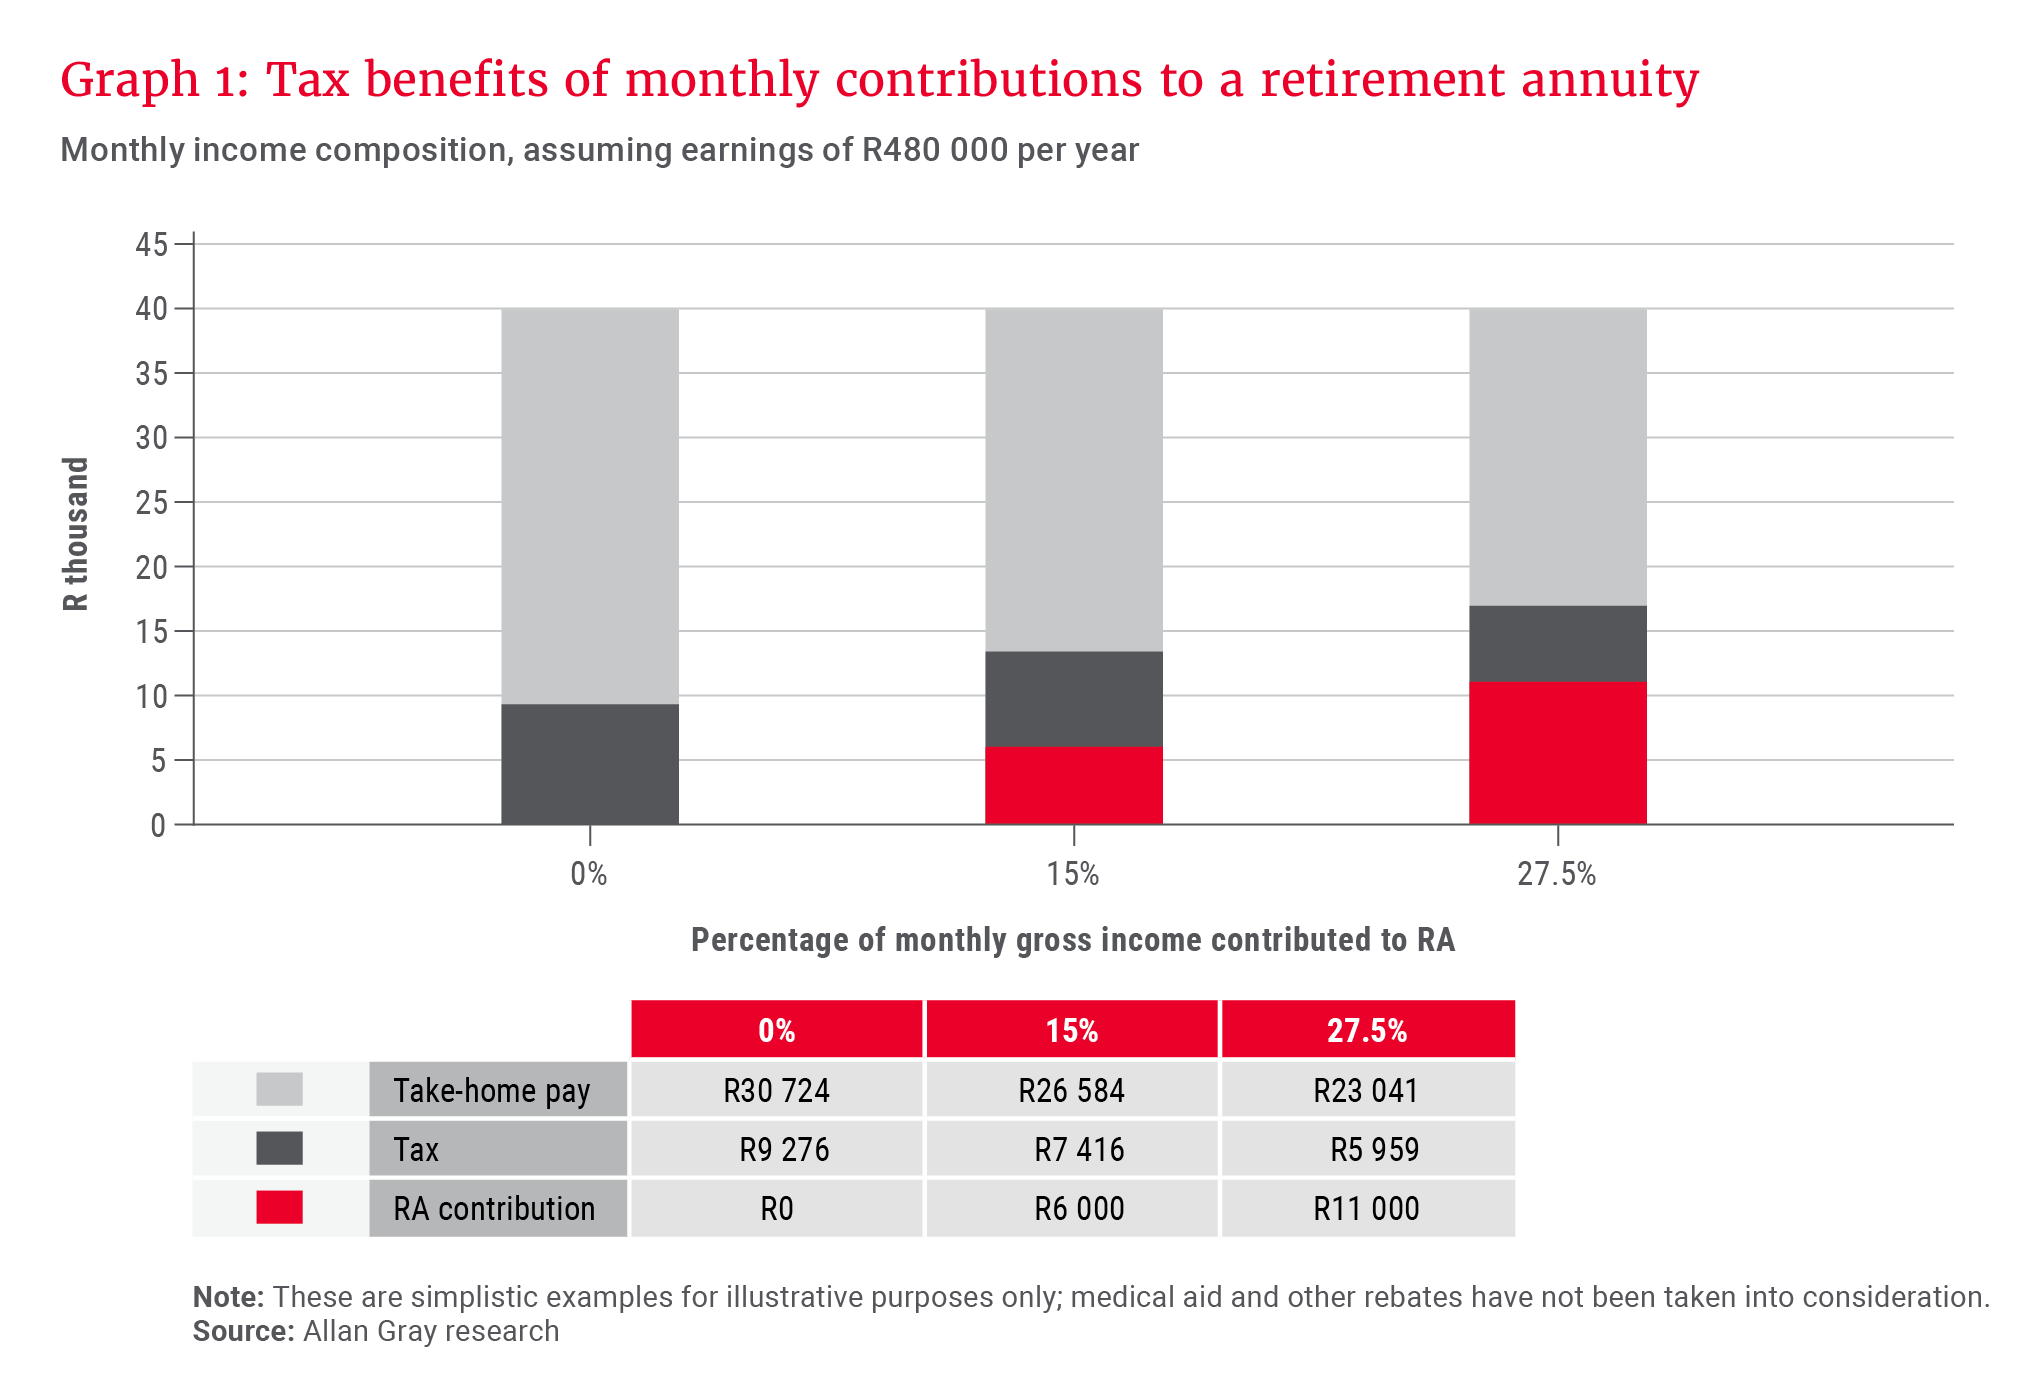 Graph 1_Tax benefits of monthly contributions to a retirement annuity_300dpi.png